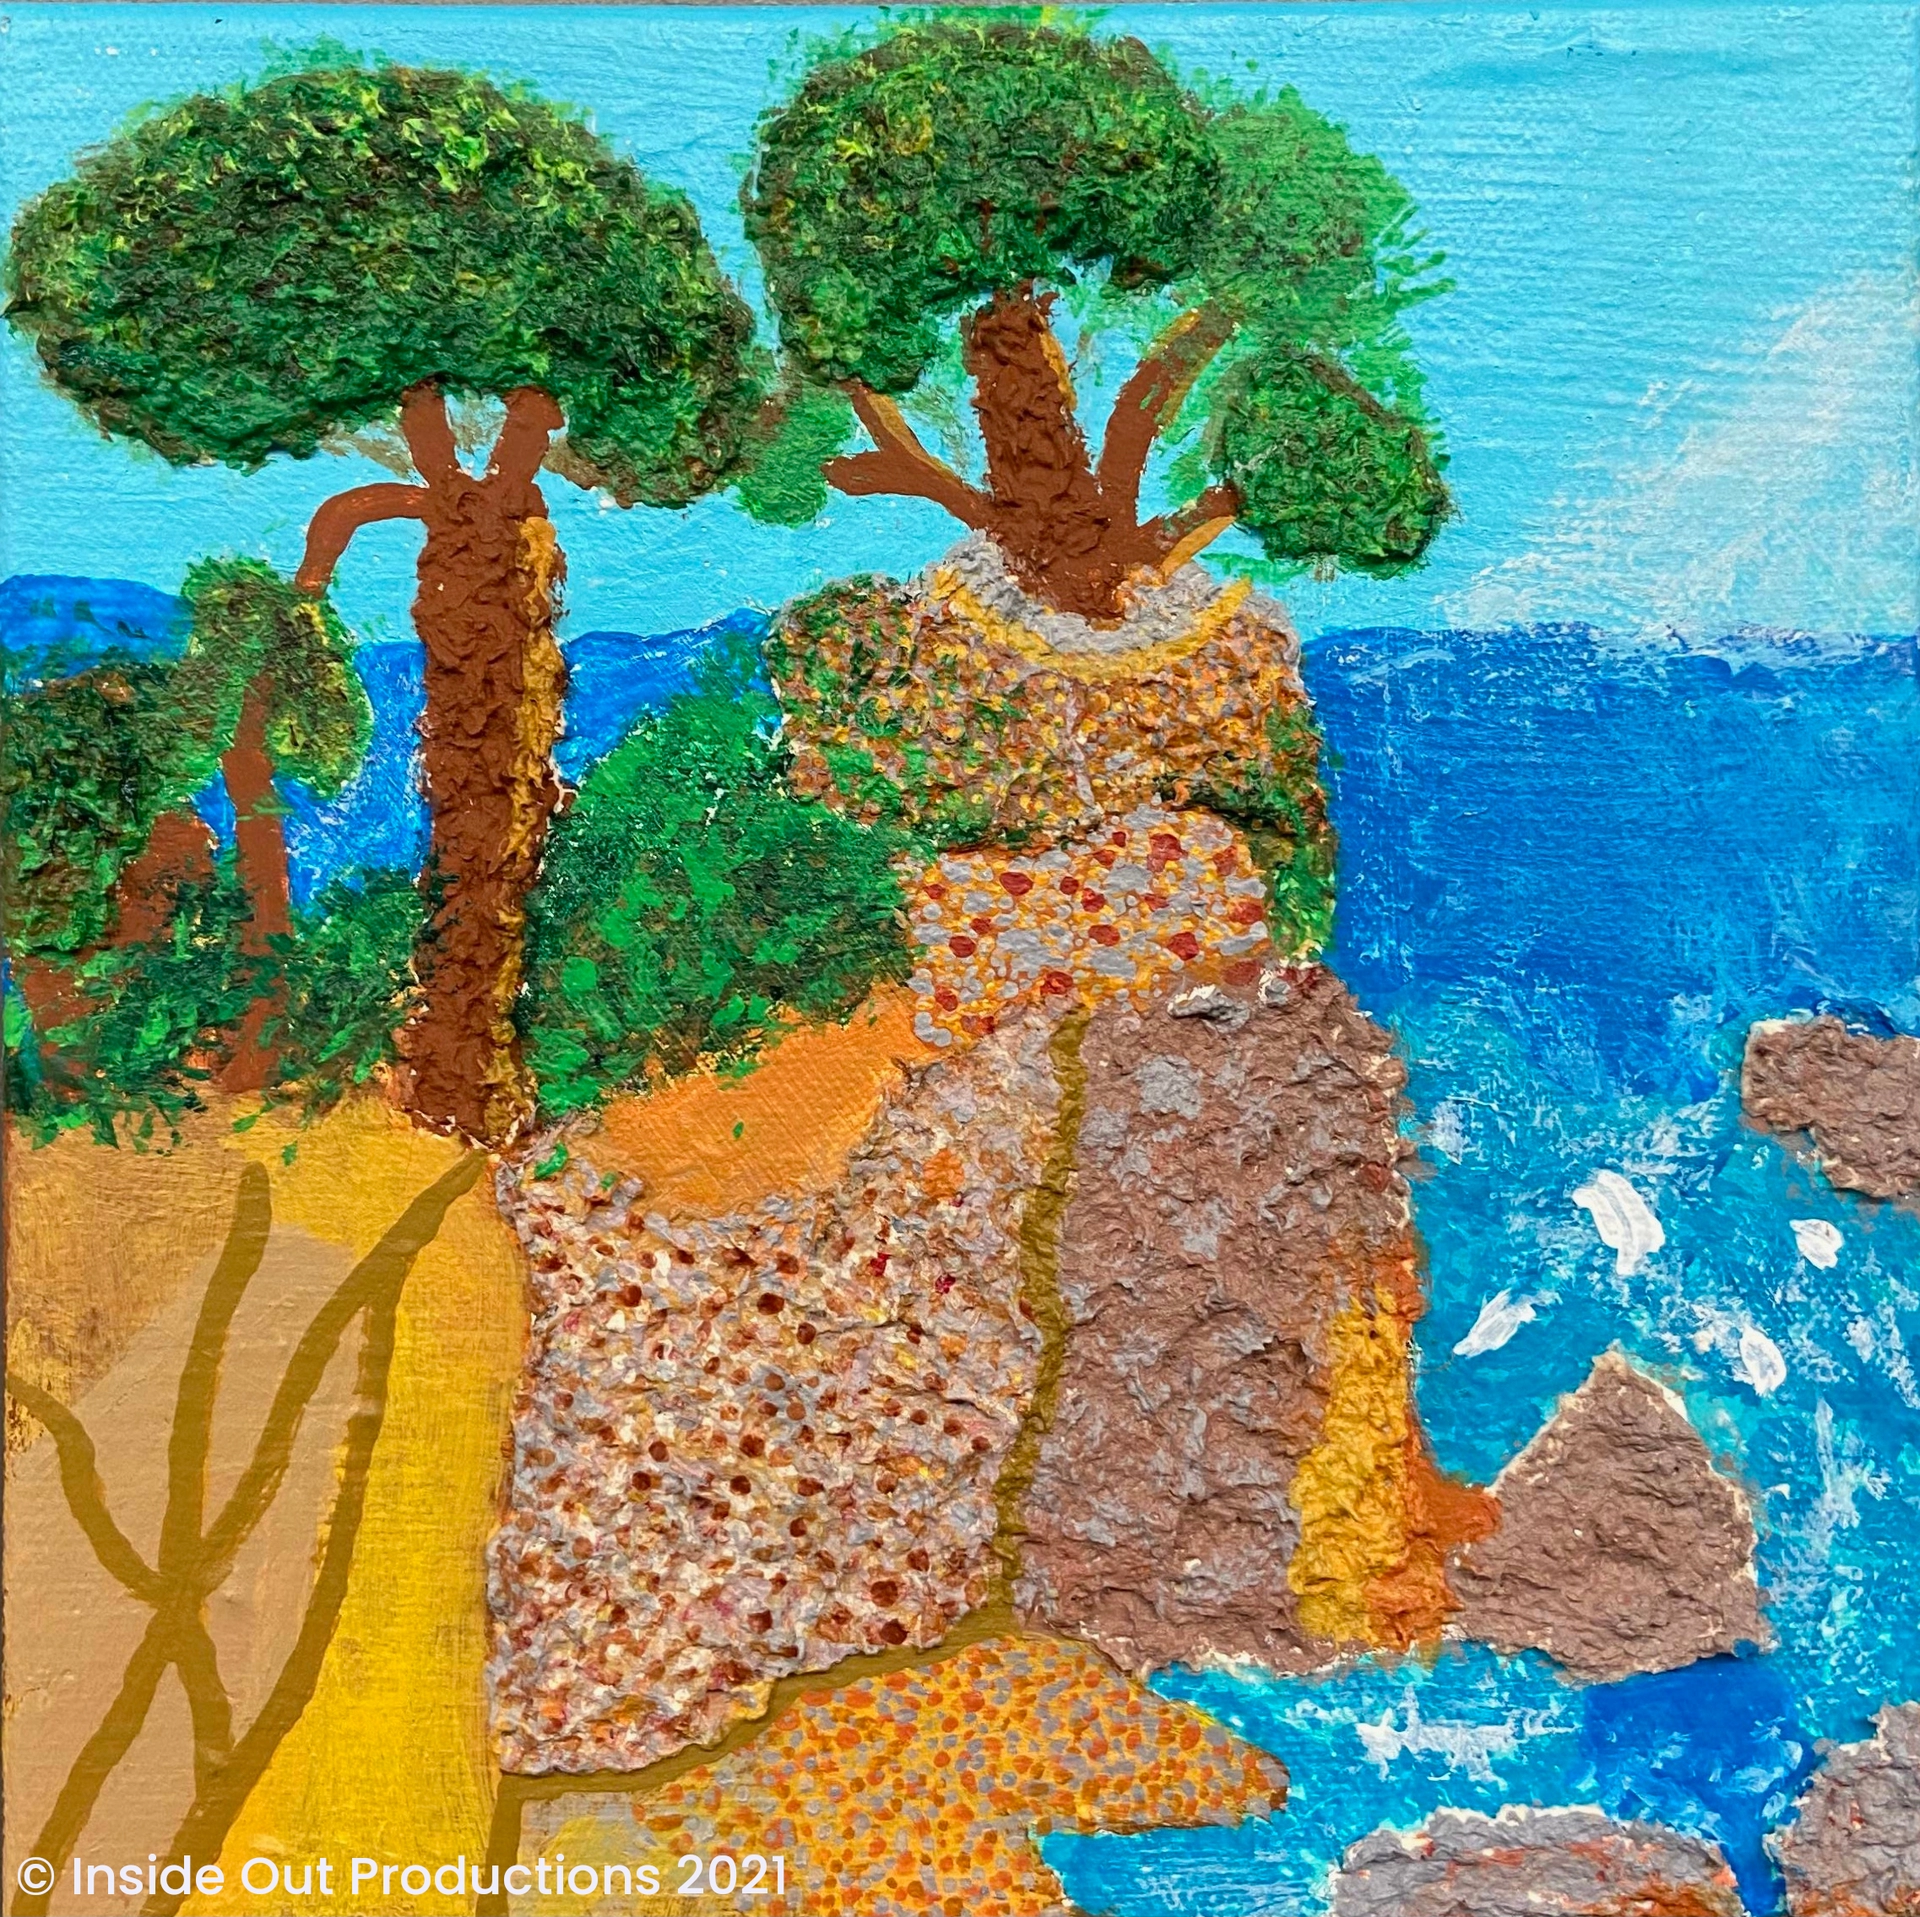 There are two trees on a cliff overlooking a blue ocean. The trees and the rocks along the cliffside are built up to create a three-dimensional texture on the canvas.